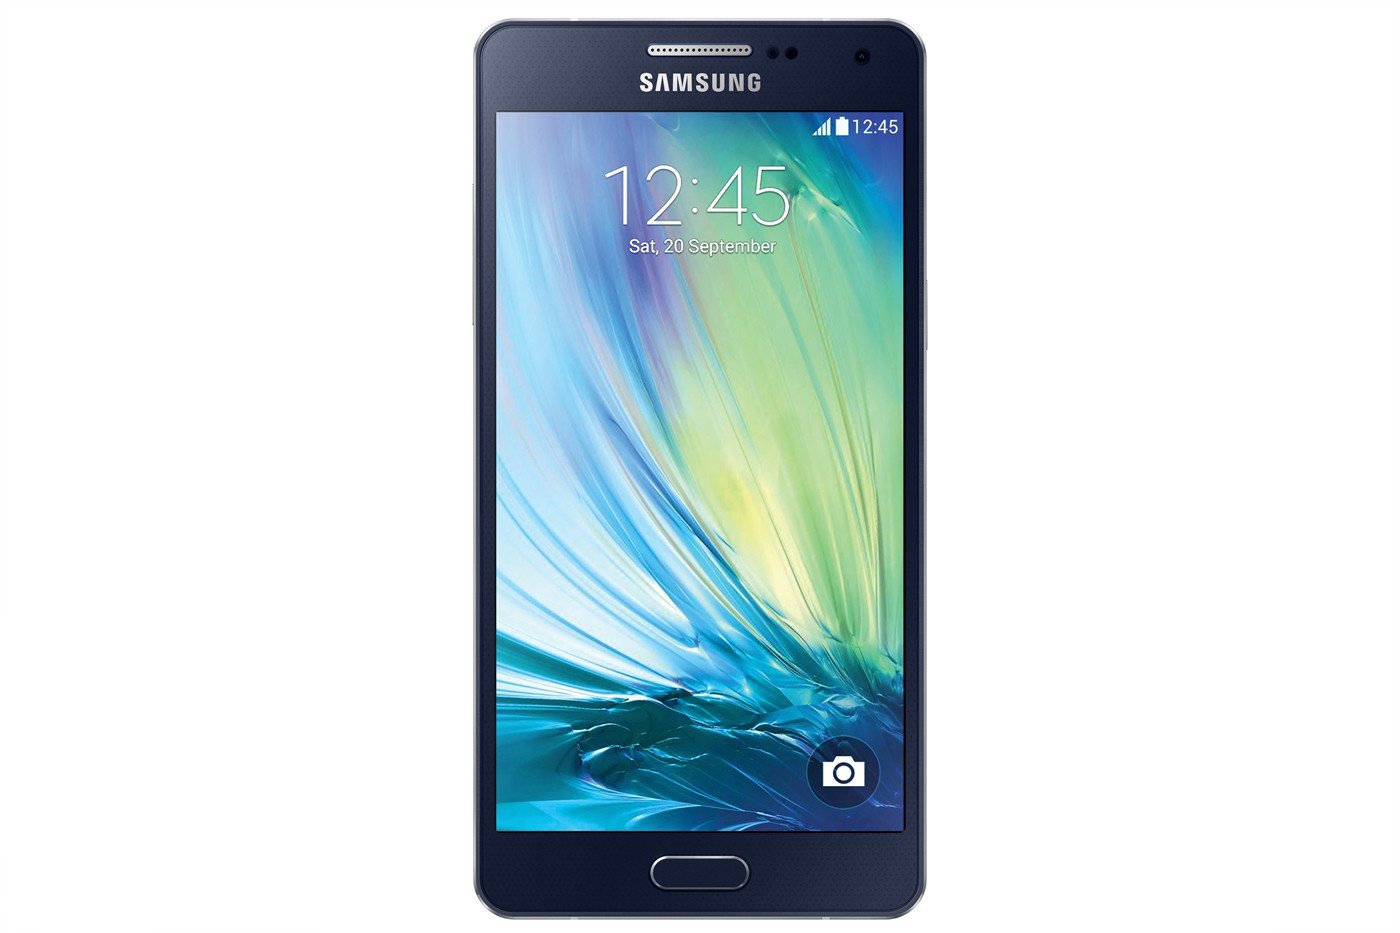 Samsung Galaxy A5 specs, review, release date - PhonesData